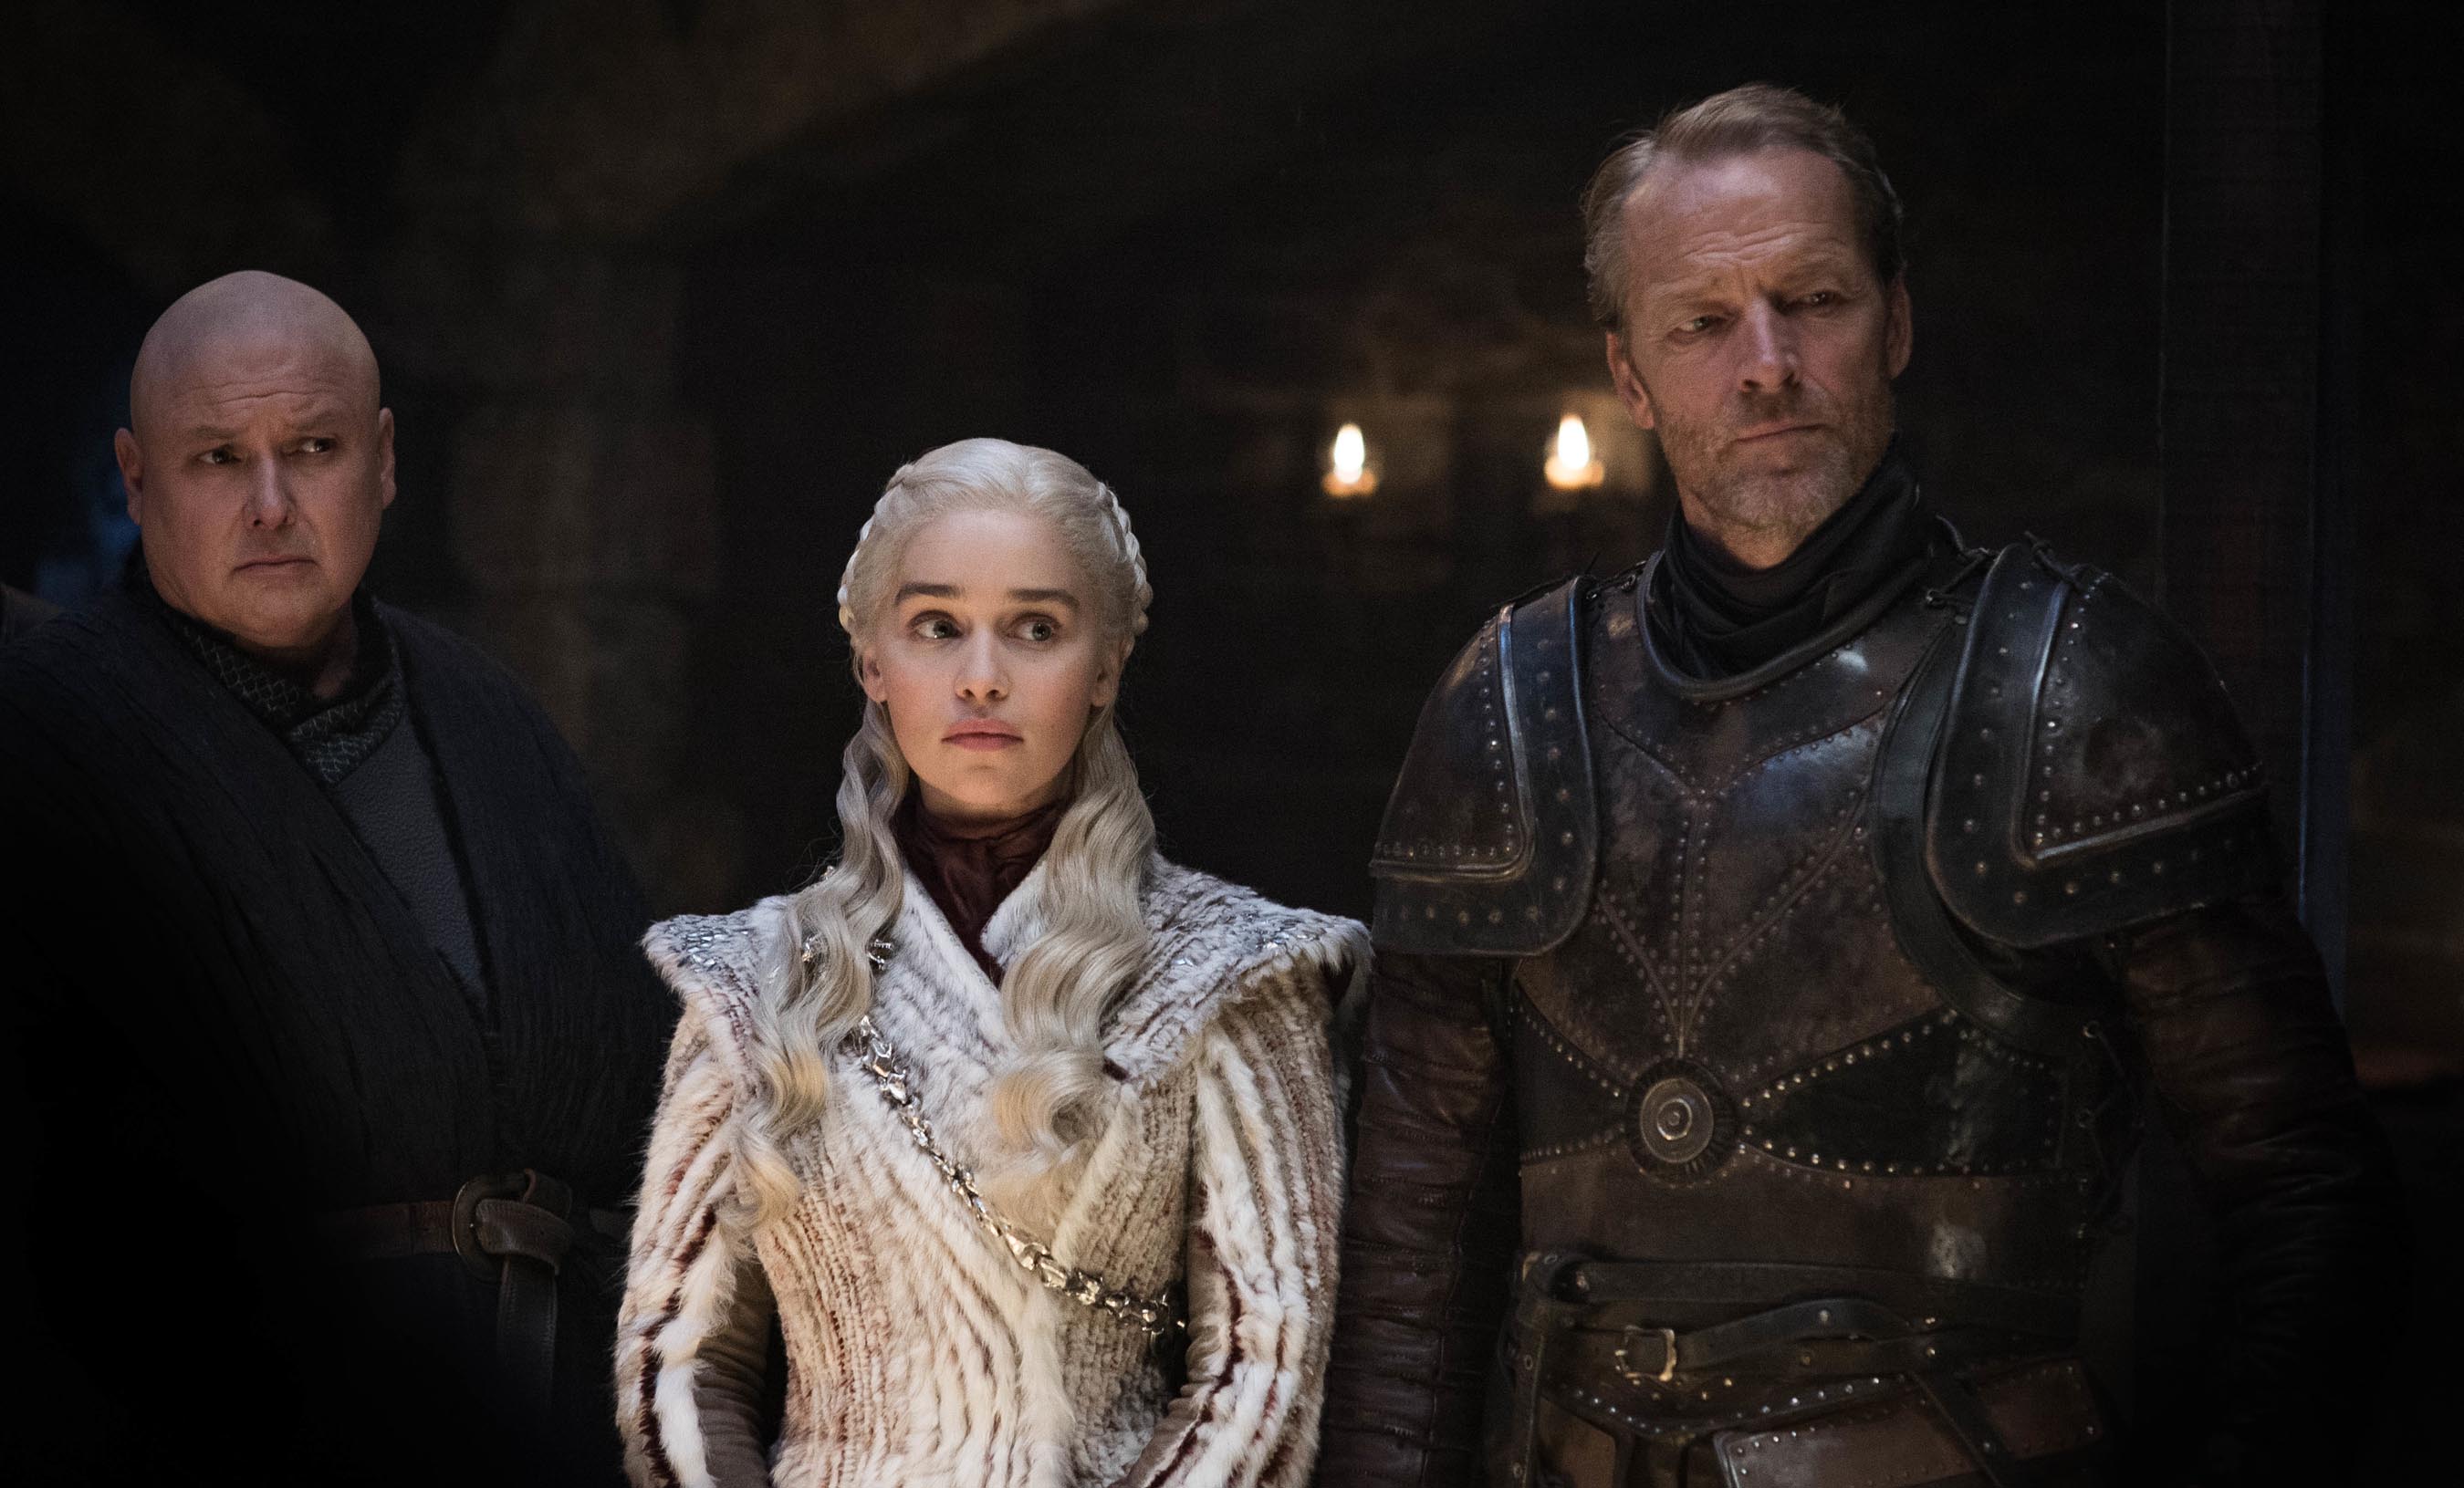 Game of Thrones S8 E2 "A Knight of the Seven Kingdoms" review: The calm before the storm